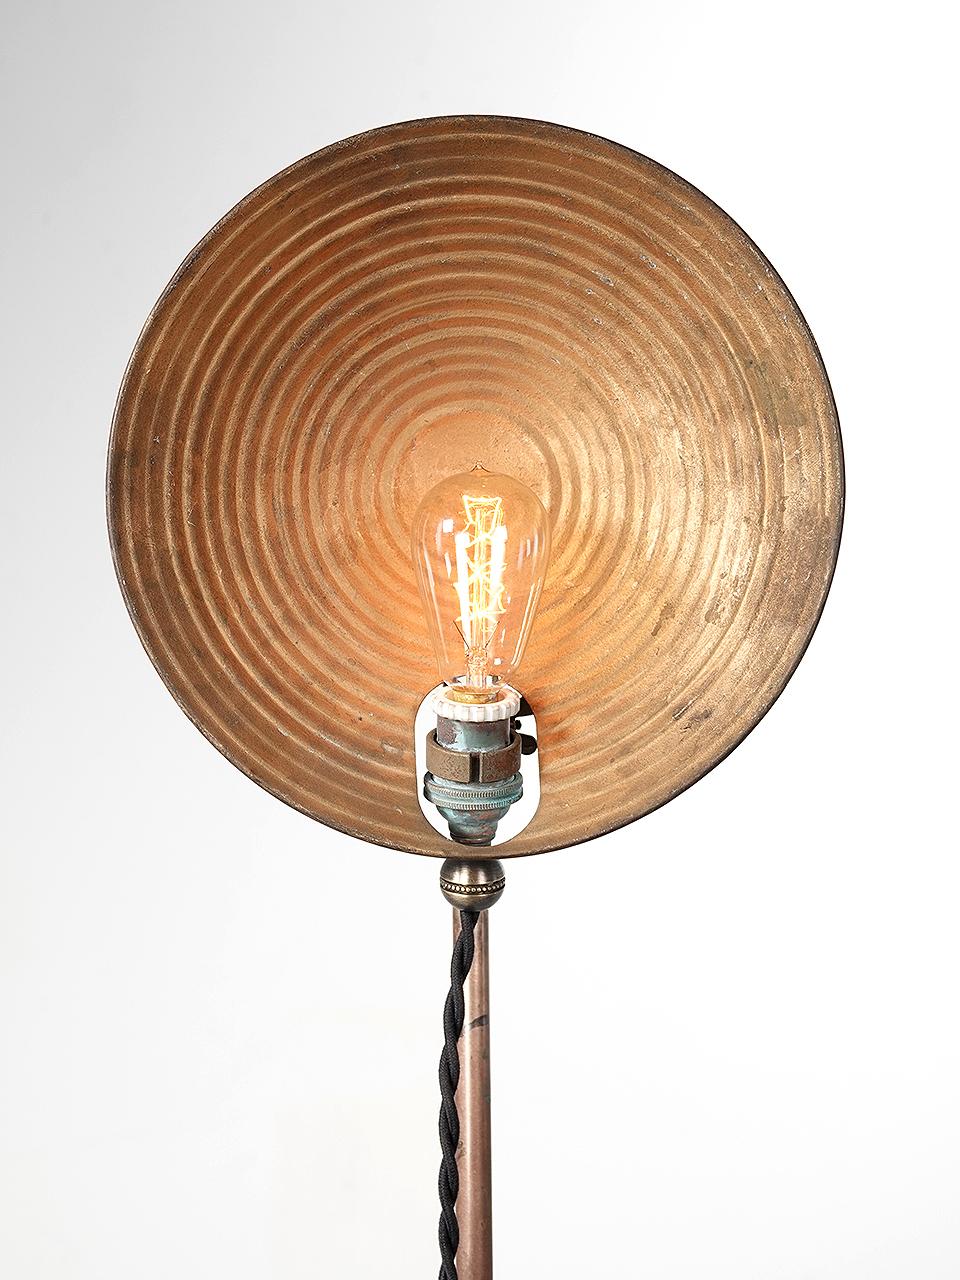 This is a very simple, light and elegant brass and tin floor lamp. Its 1920s Industrial but looks very modern and high style. The tin shade has a stepped ring pattern showing a nice original patina. The stand and base are solid brass.